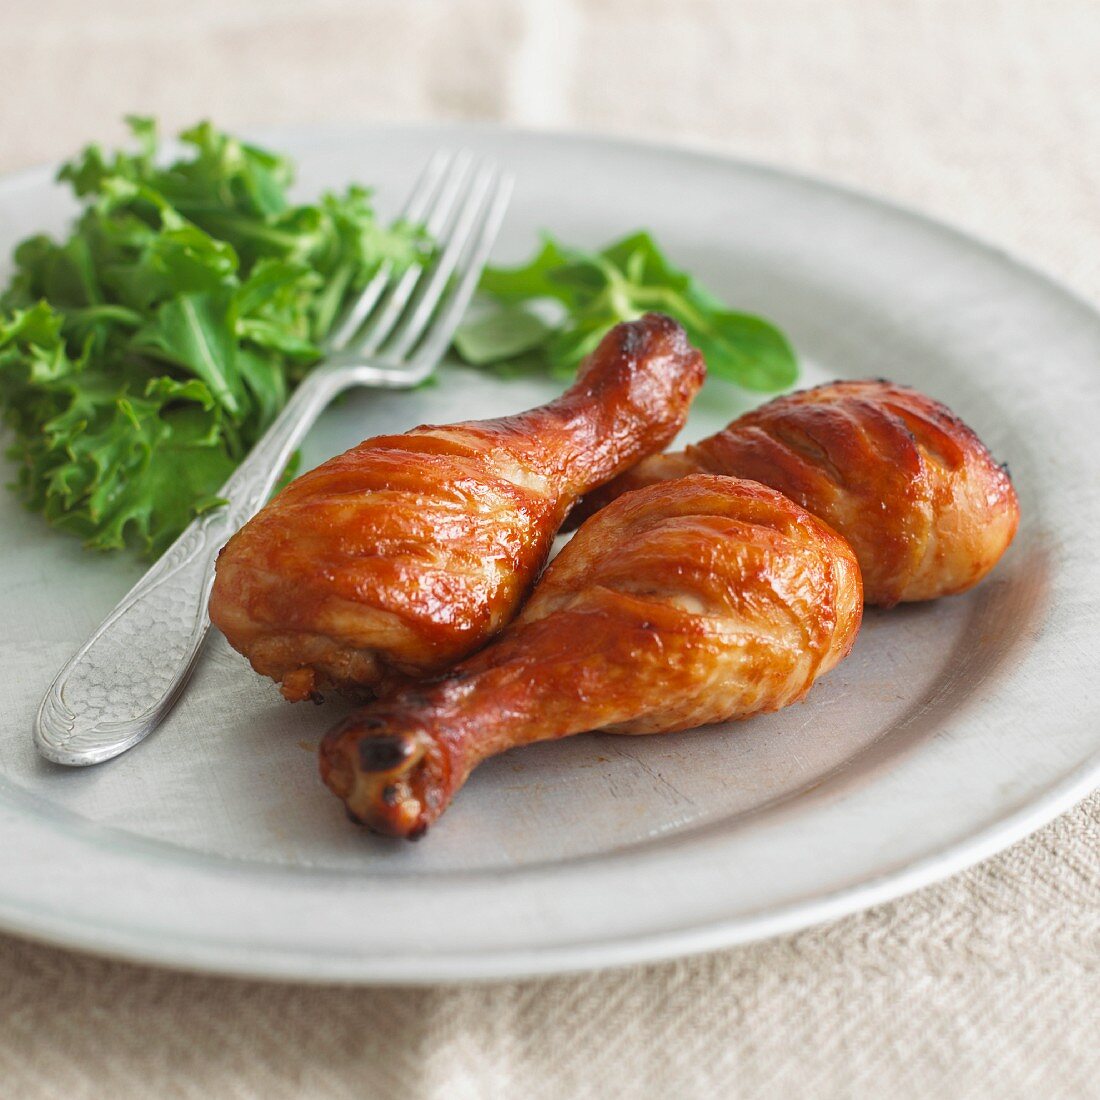 Glazed, grilled chicken legs with green salad